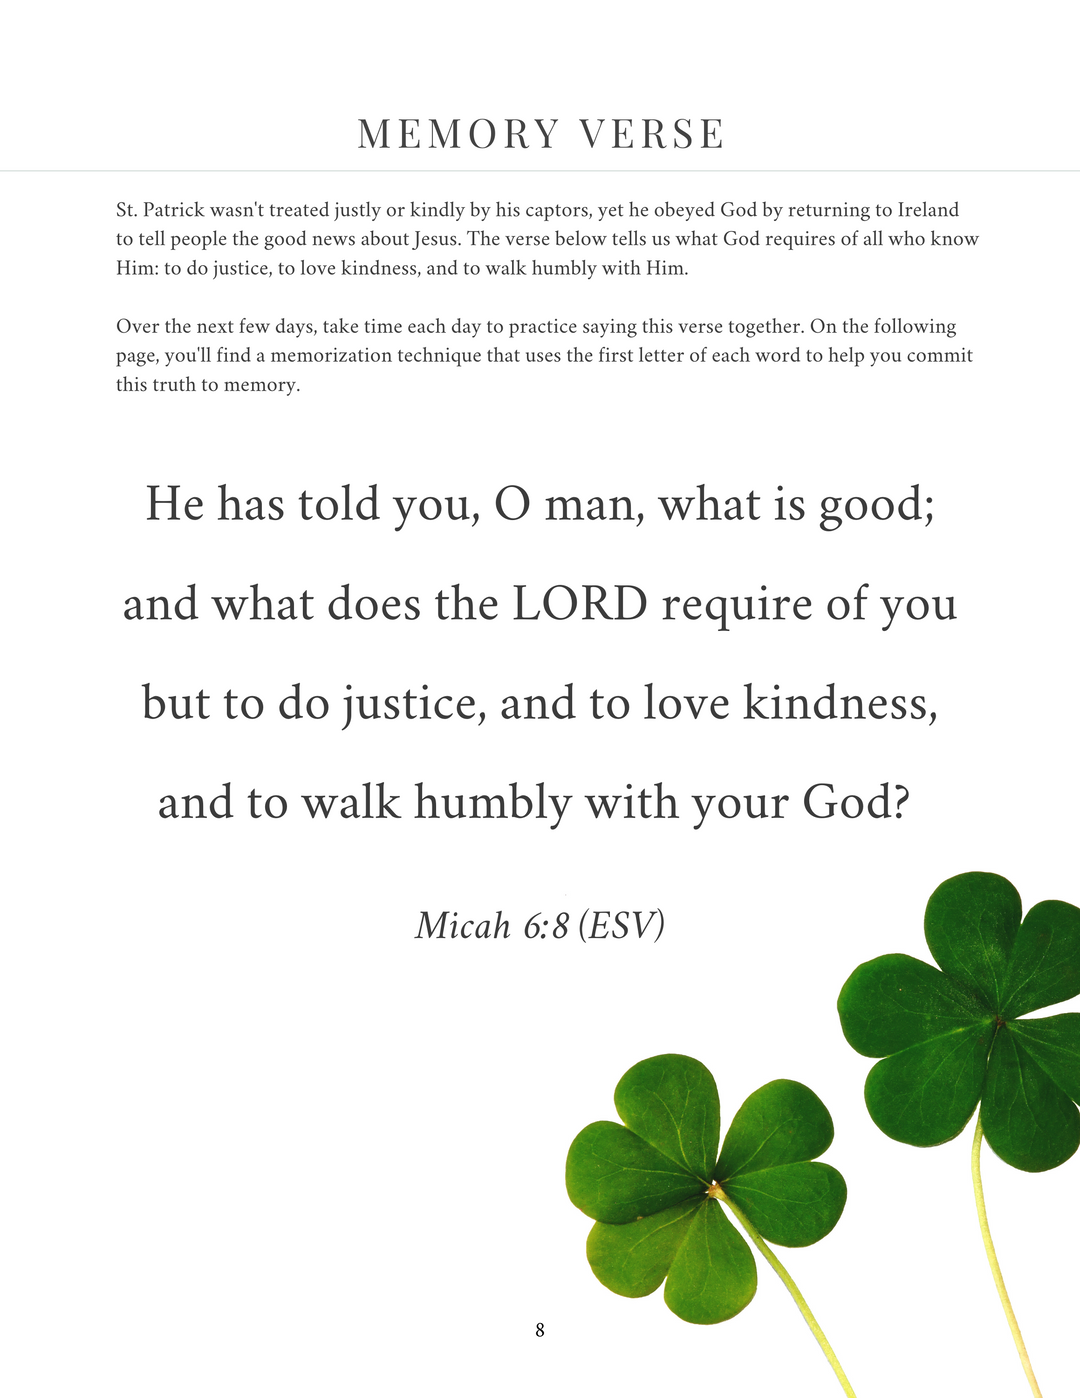 The St. Patrick's Day guide